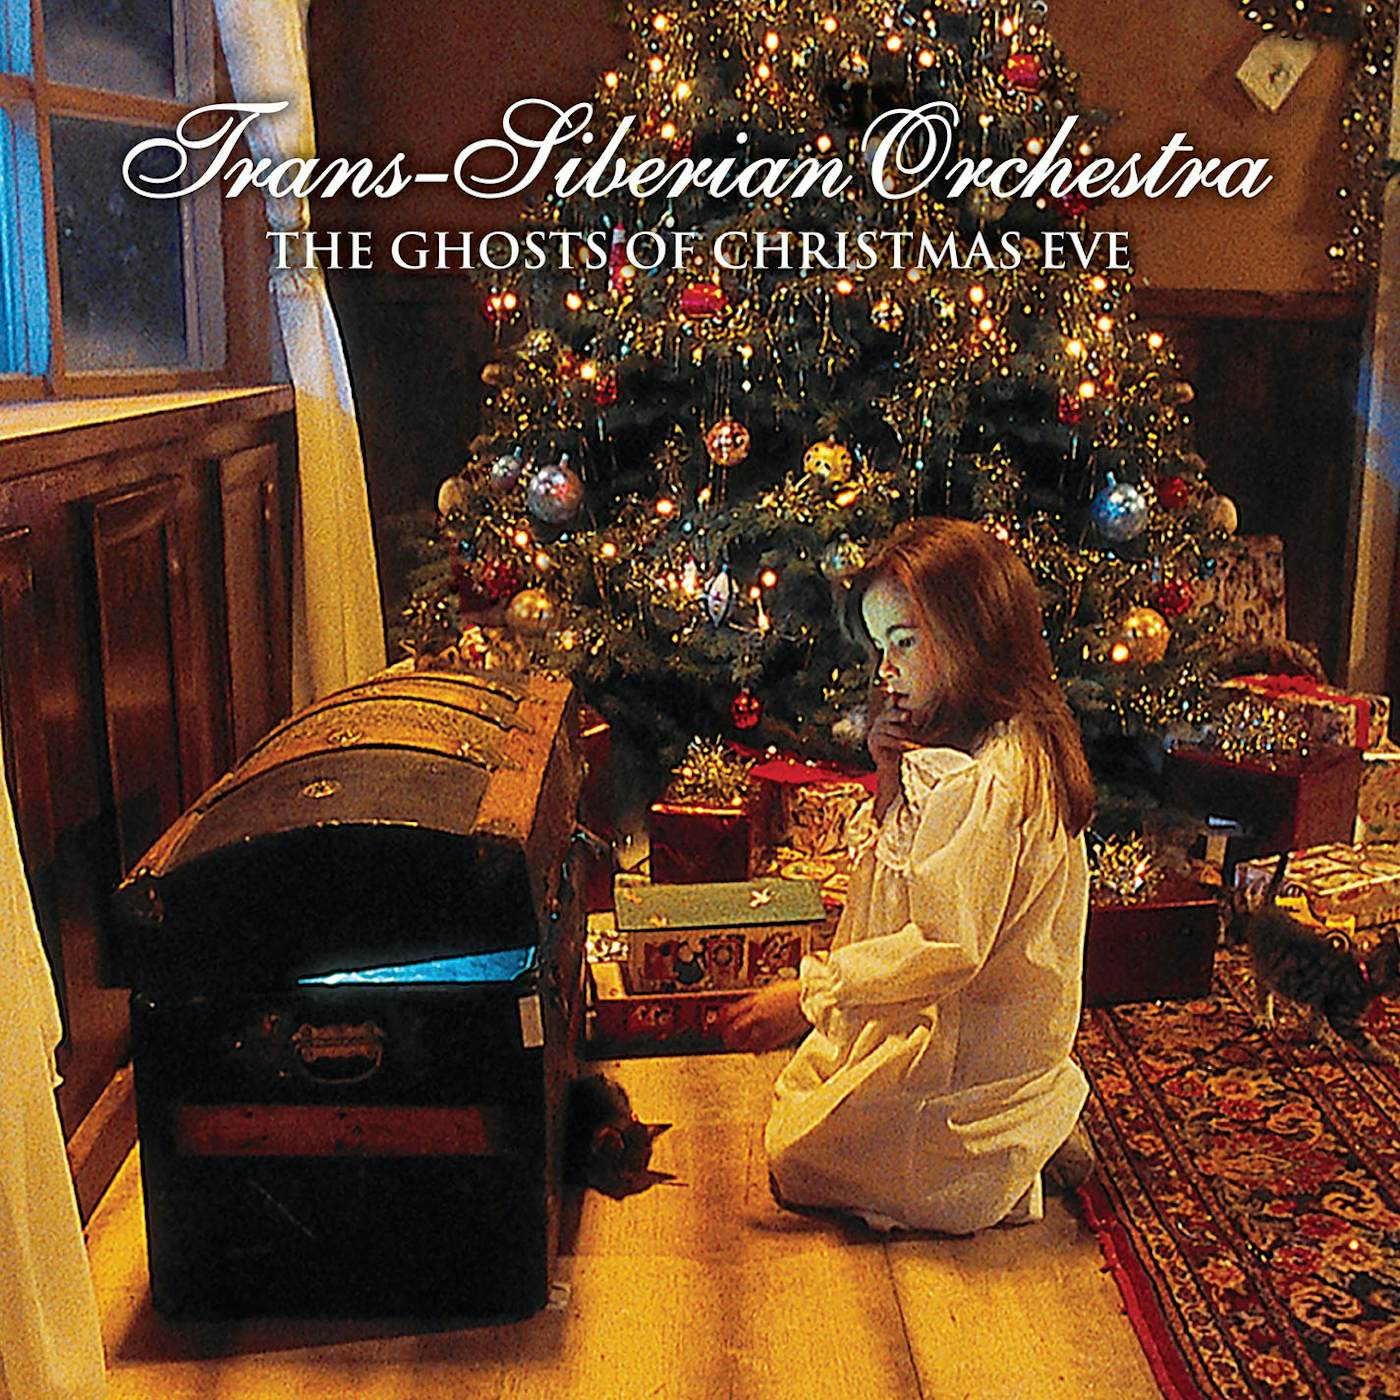 Trans-Siberian Orchestra GHOSTS OF CHRISTMAS EVE Vinyl Record